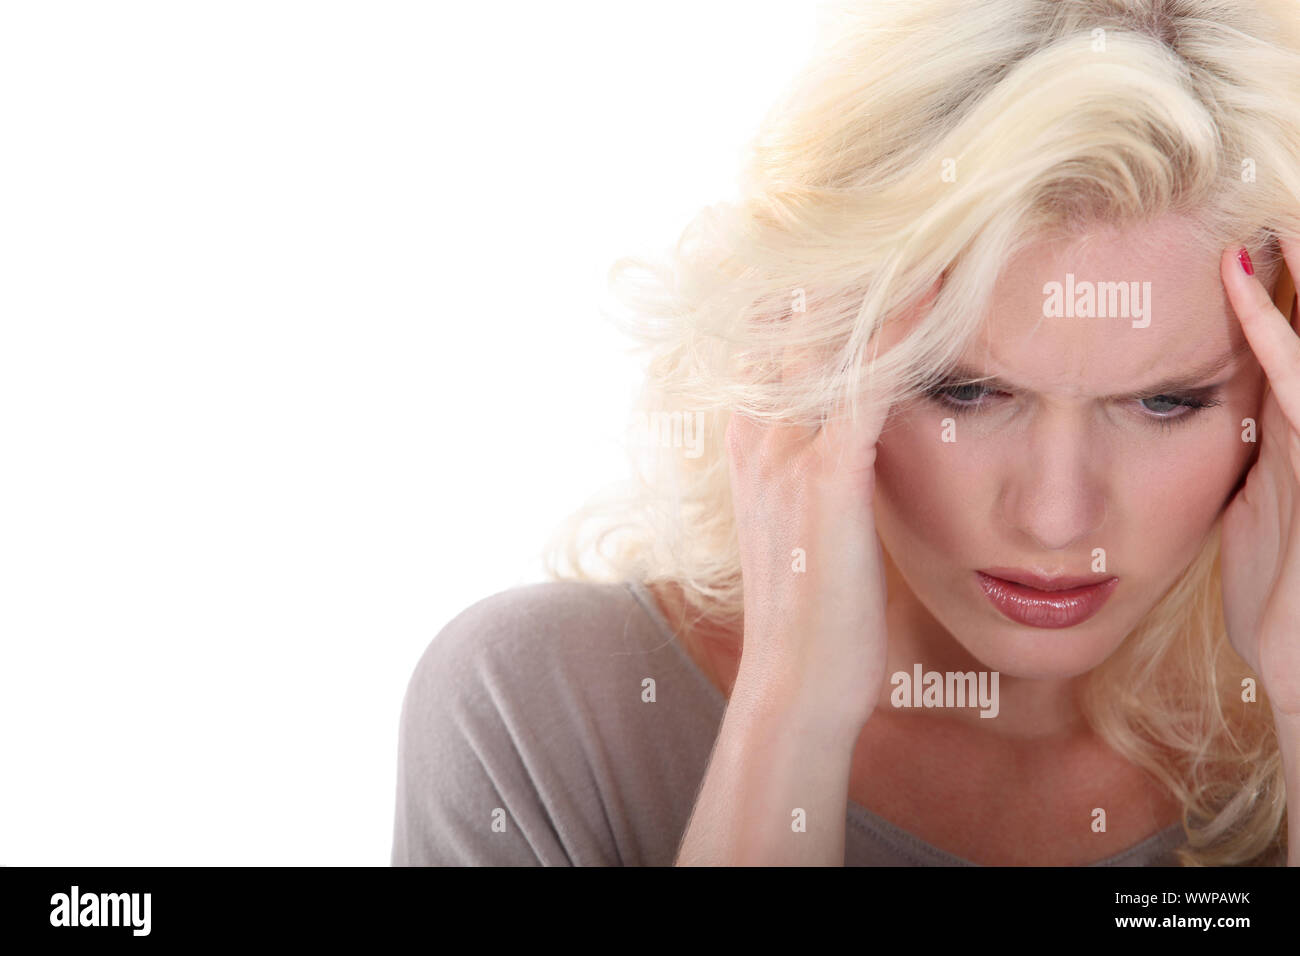 pretty woman questioning herself Stock Photo